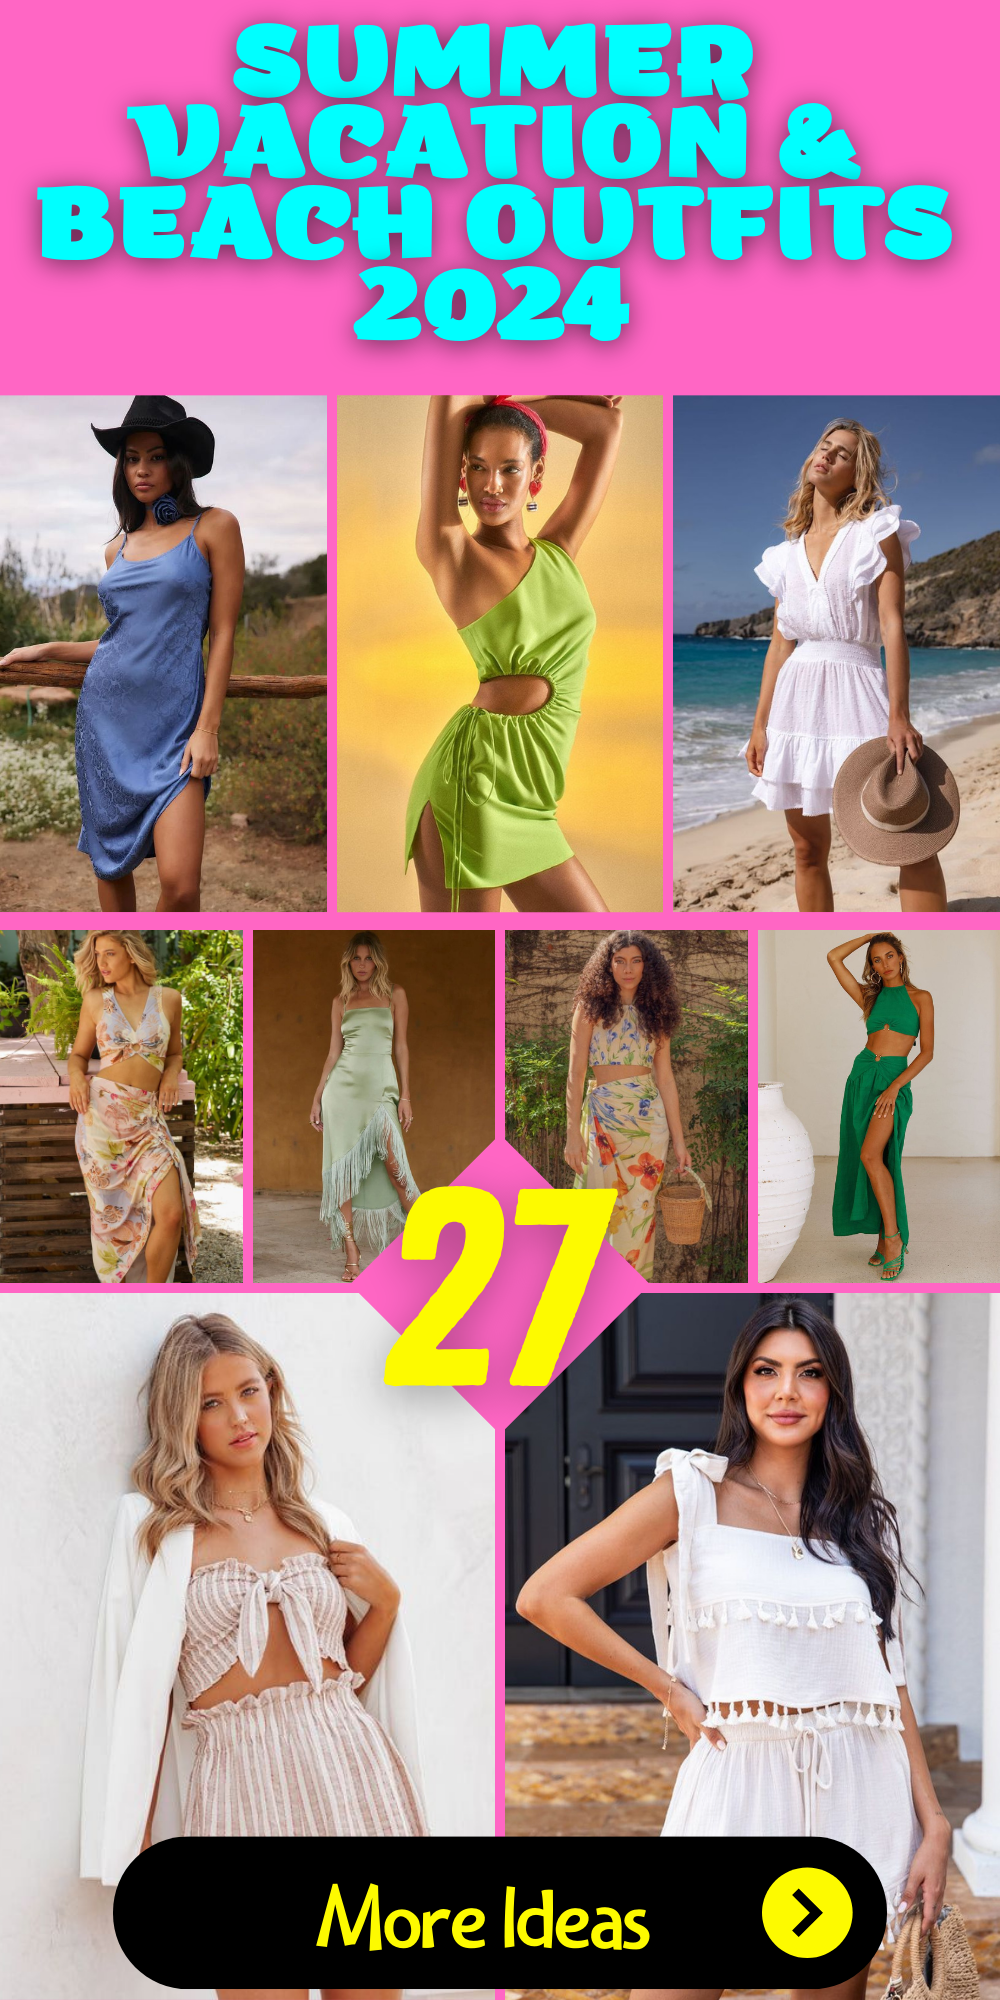 Sizzling Summer Vacation & Beach Outfits 2024: Your Ultimate Style Guide